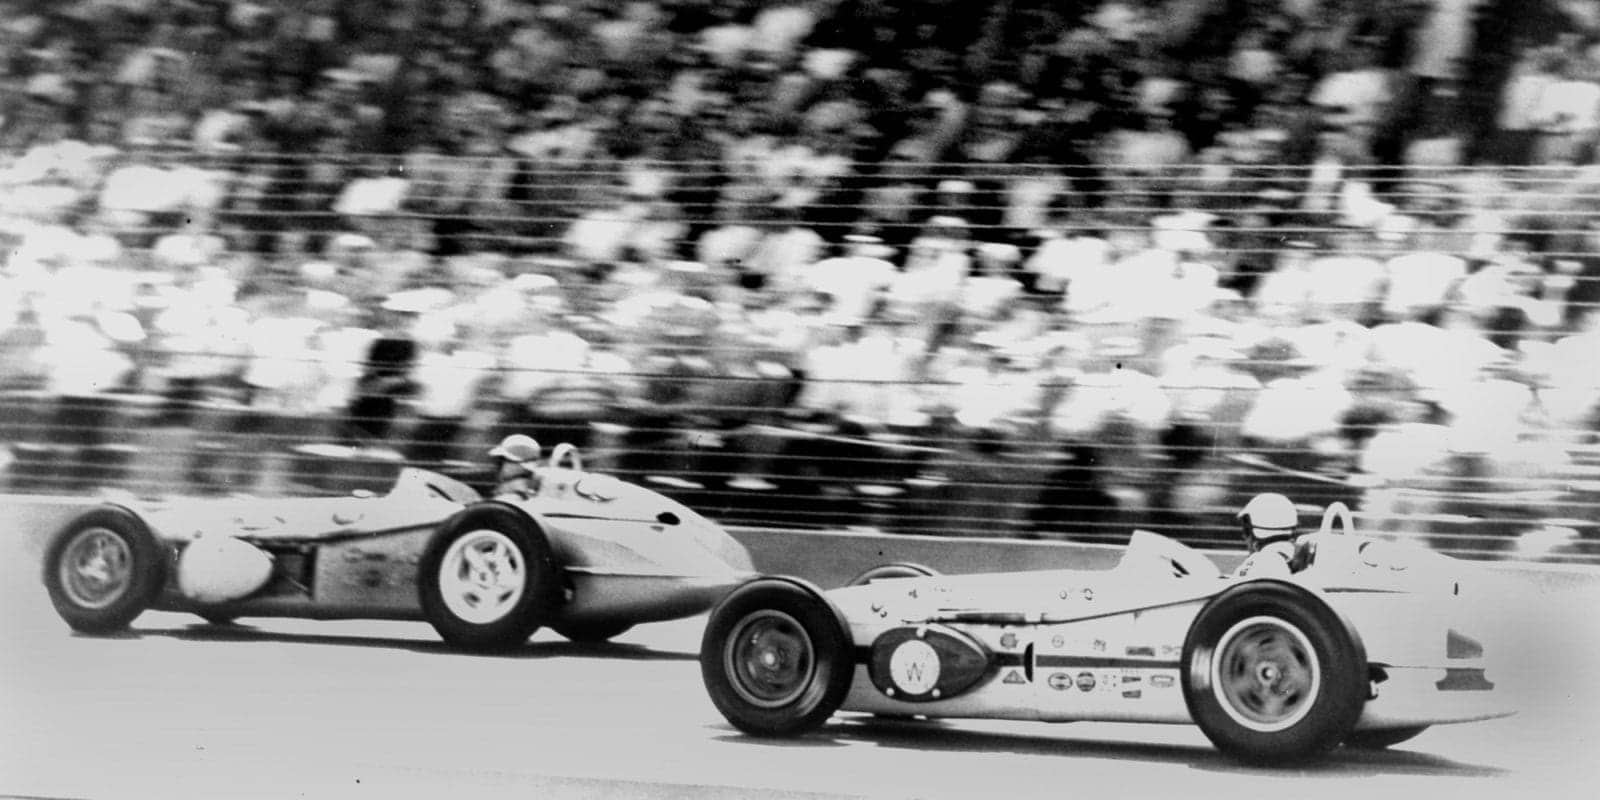 Jim Rathmann and Rodger ward battle for victory at the 1960 Indy 500